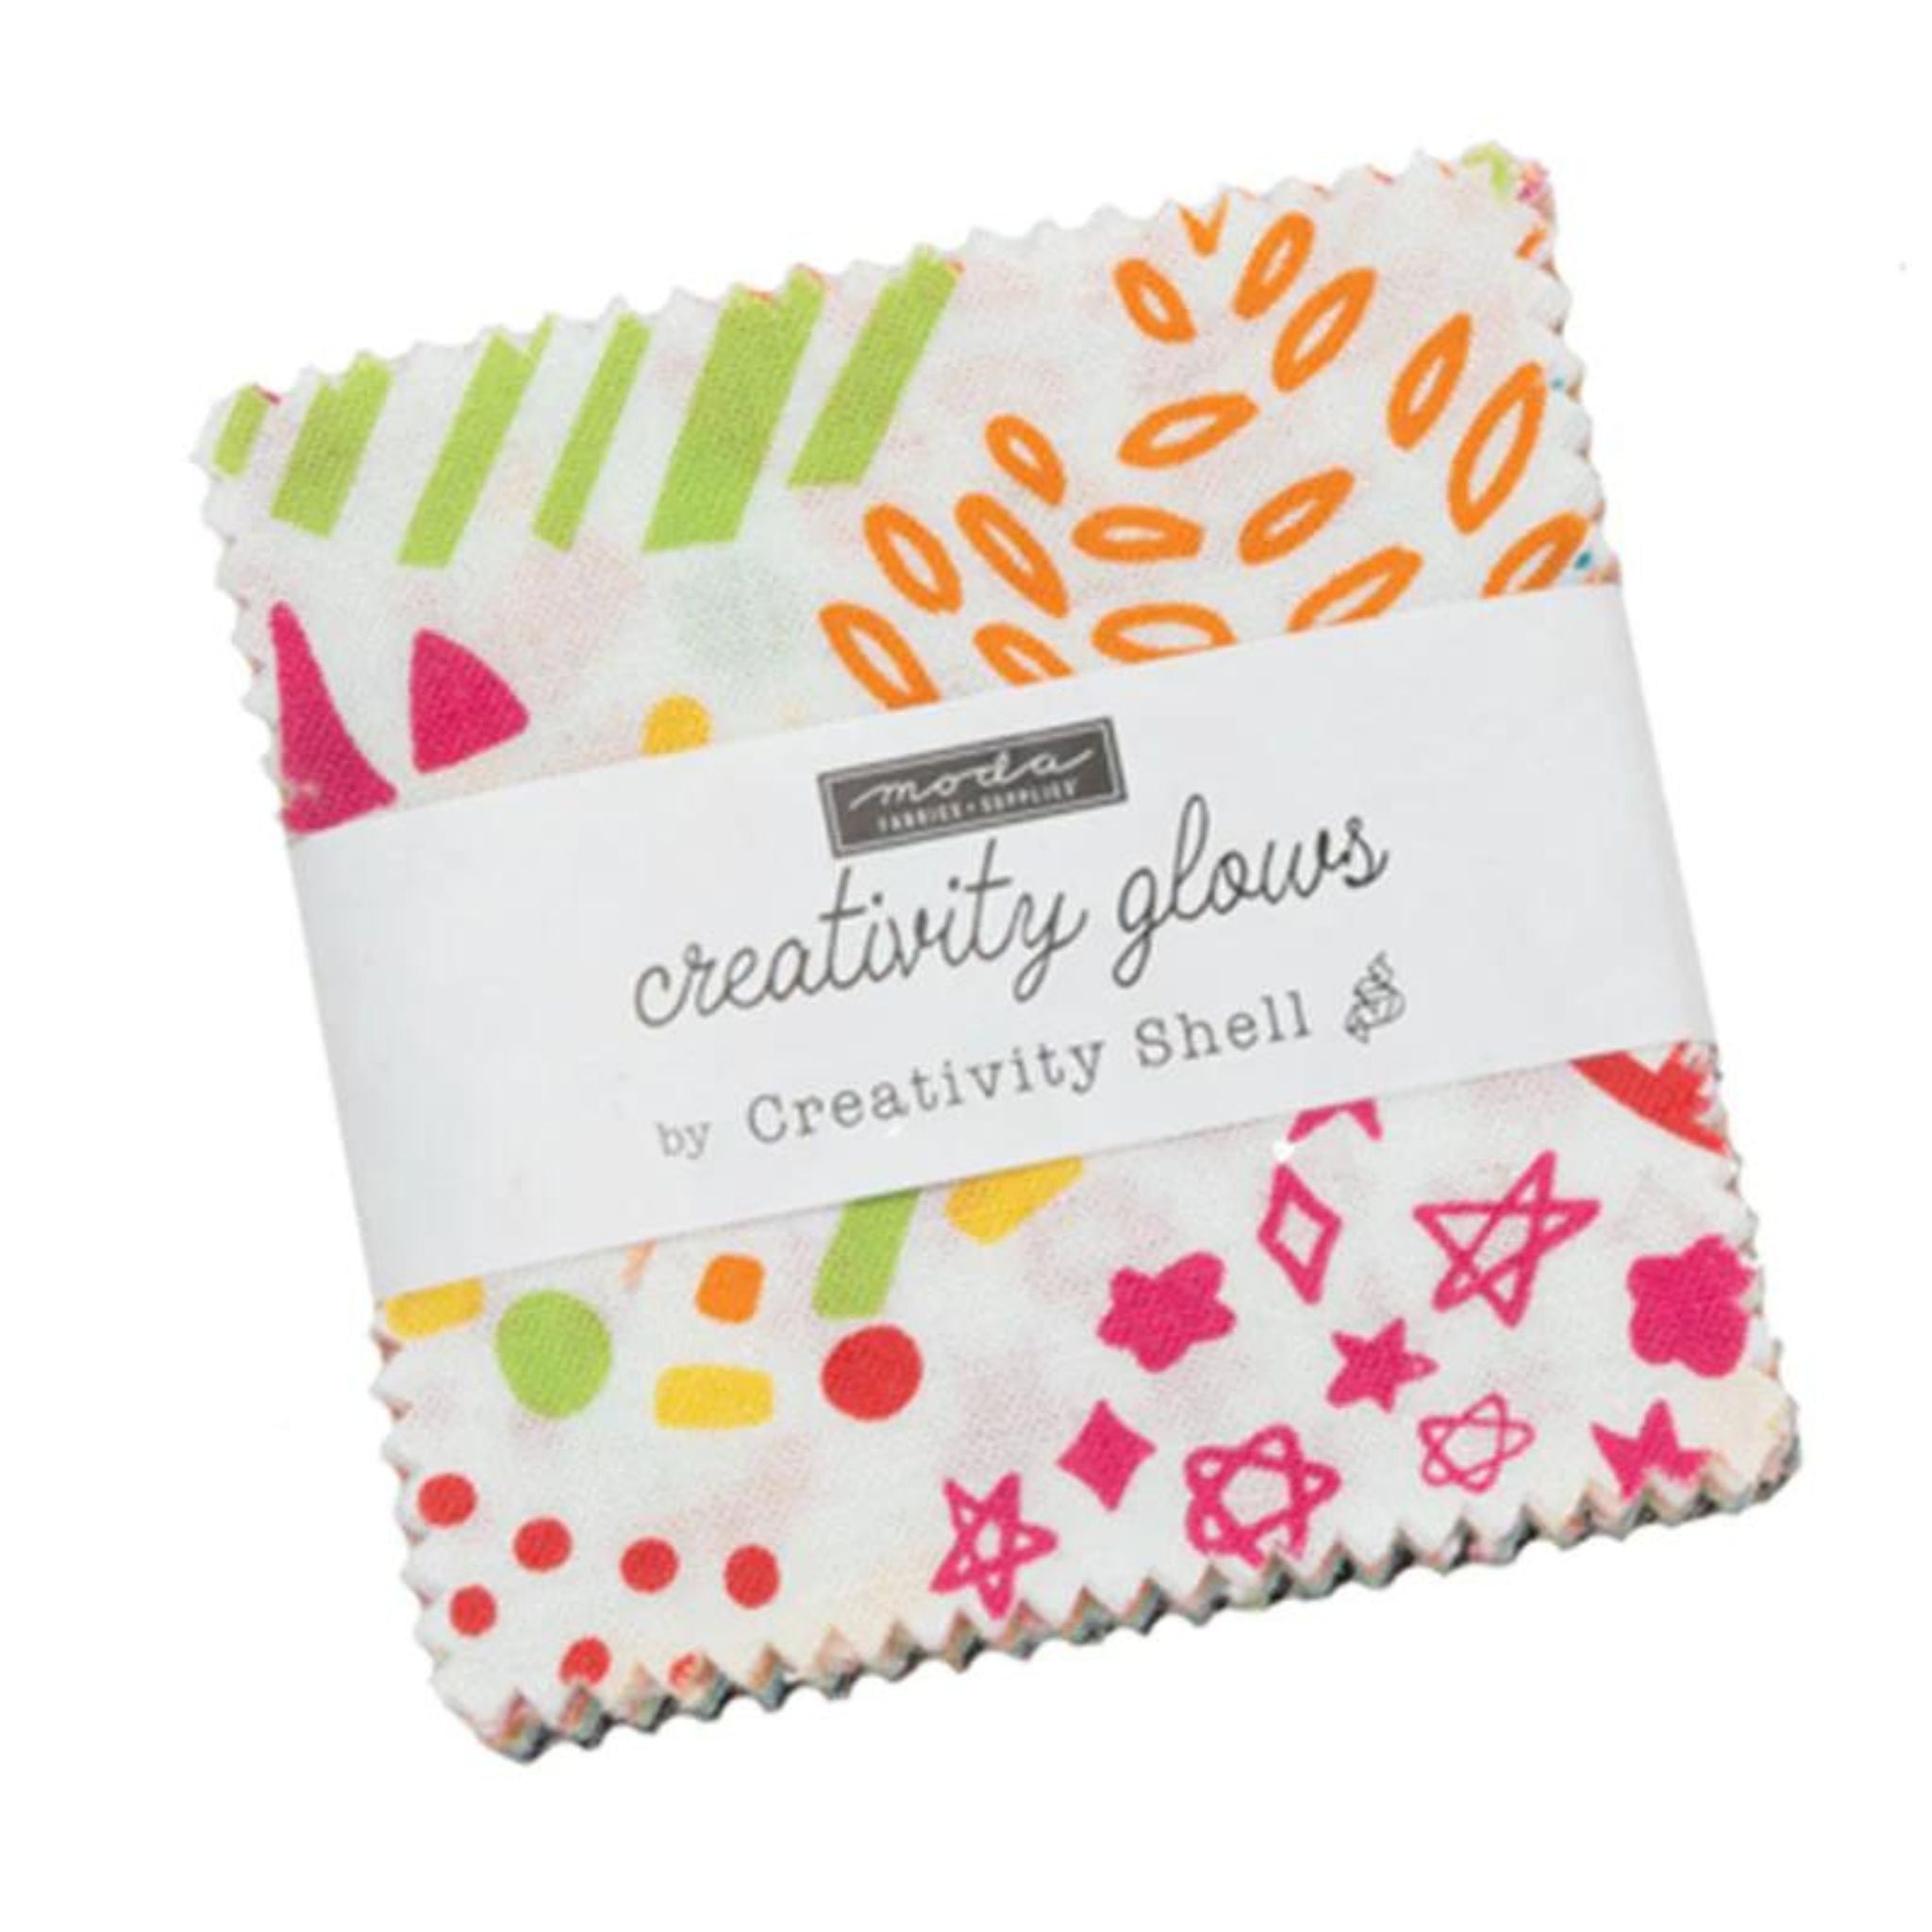 Brightly coloured primary colours and shapes - Creativity Glows charm pack by Moda